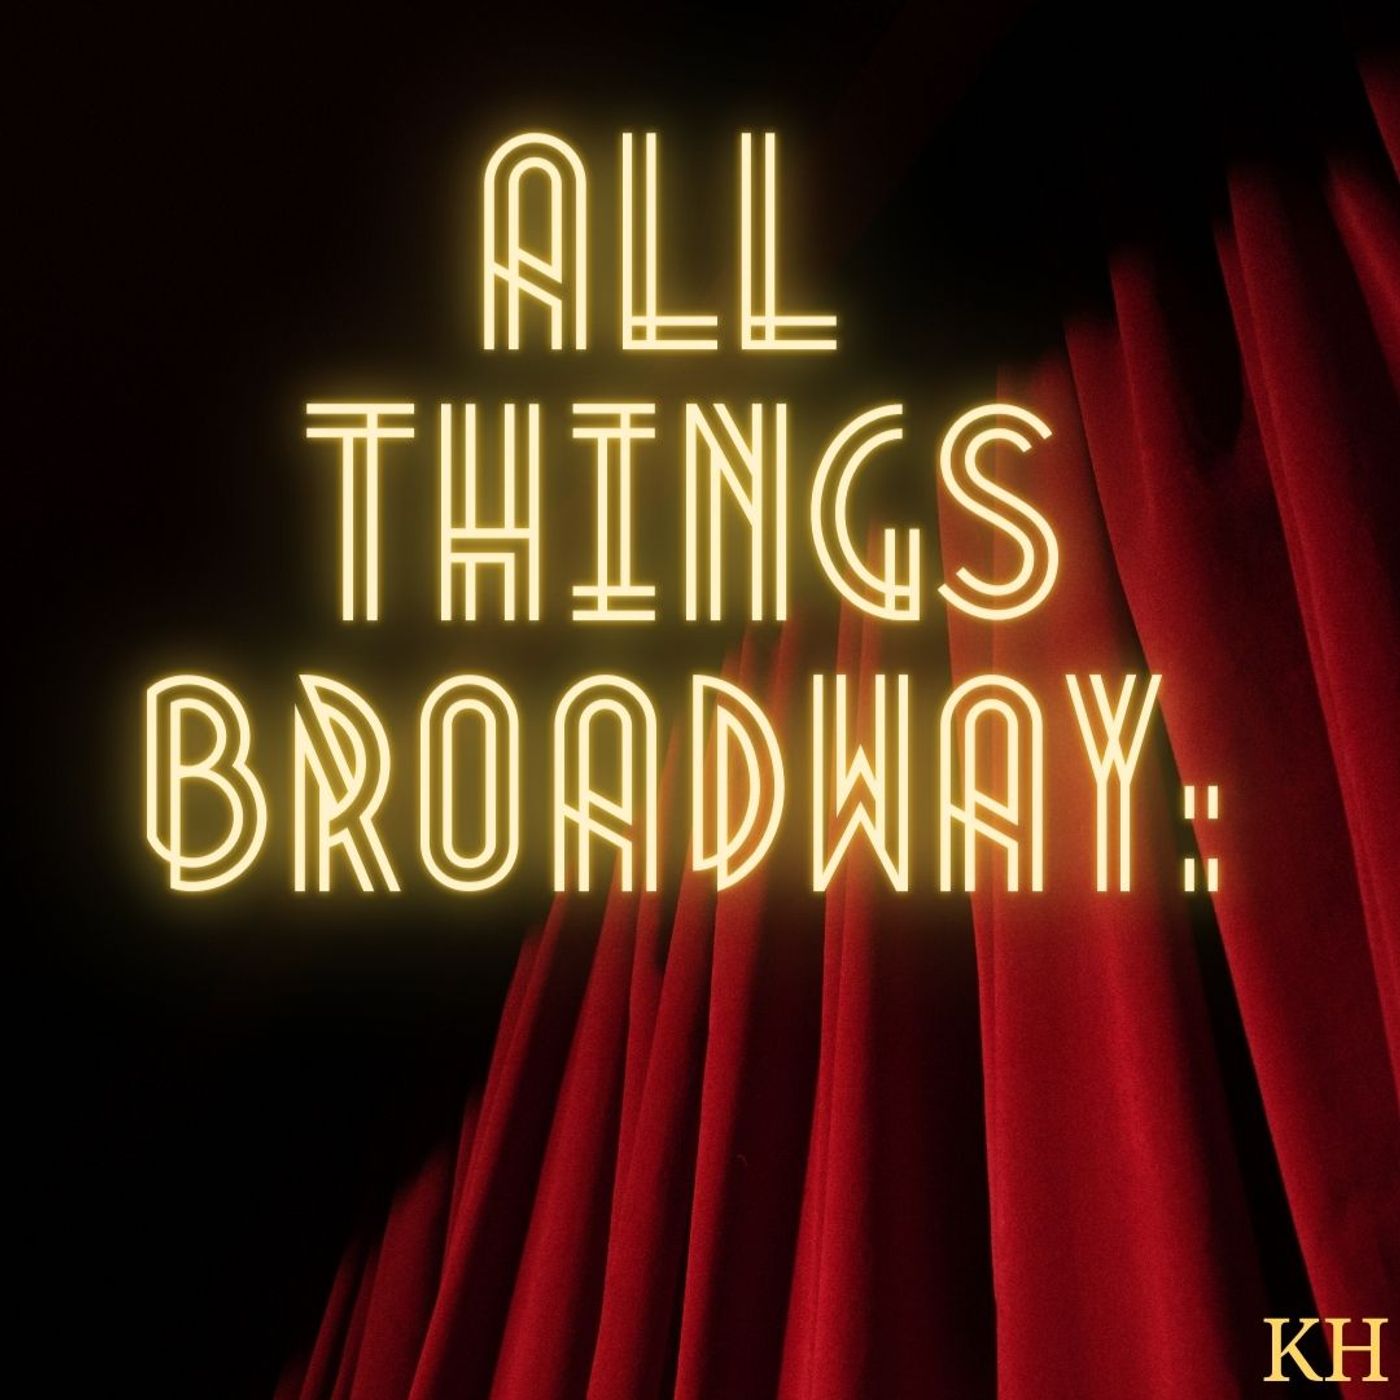 All Things Broadway